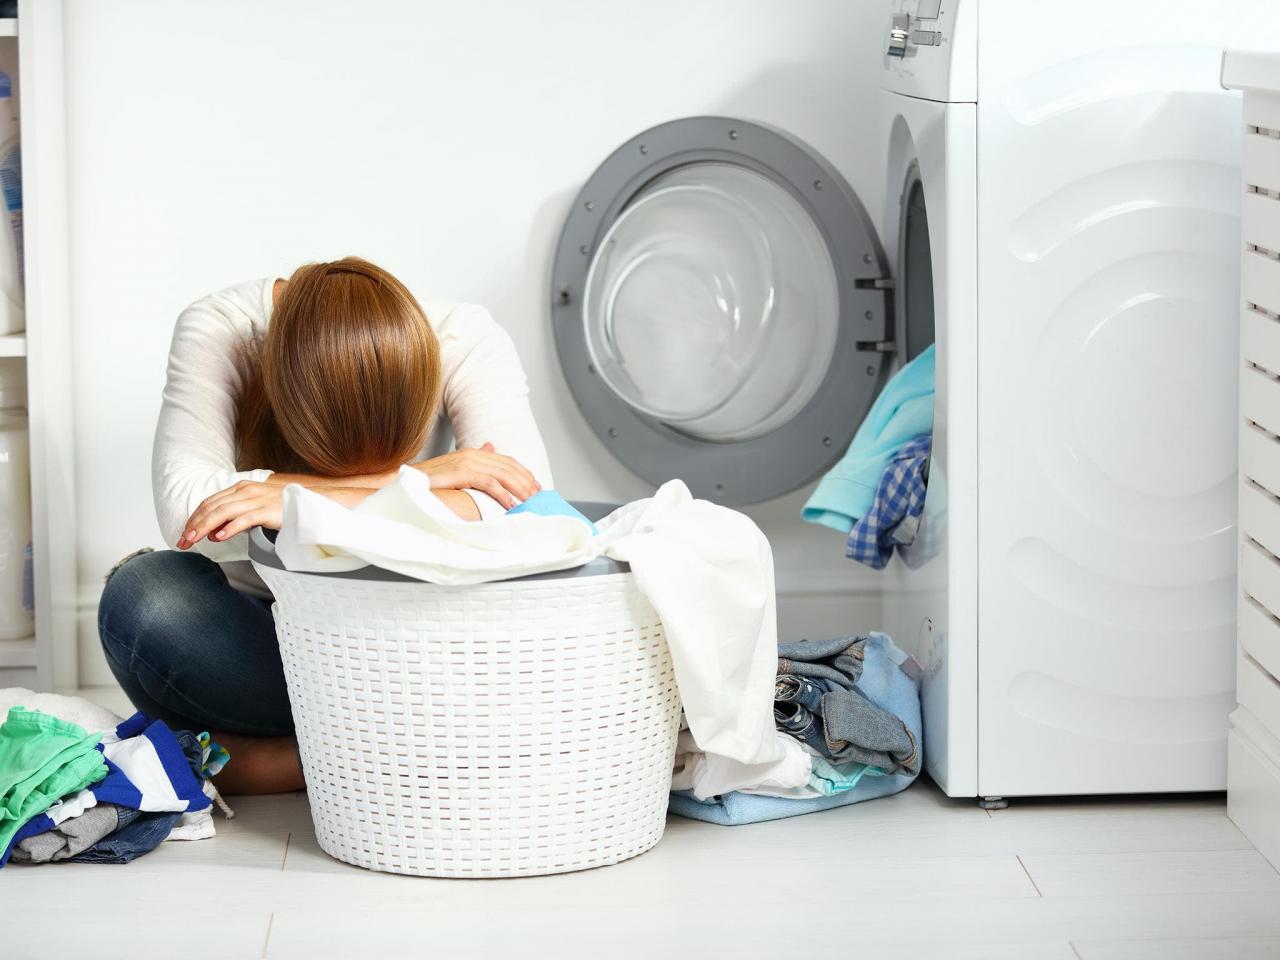 Households are using twice as much energy as needed for laundry, reveals  research | The Independent | The Independent